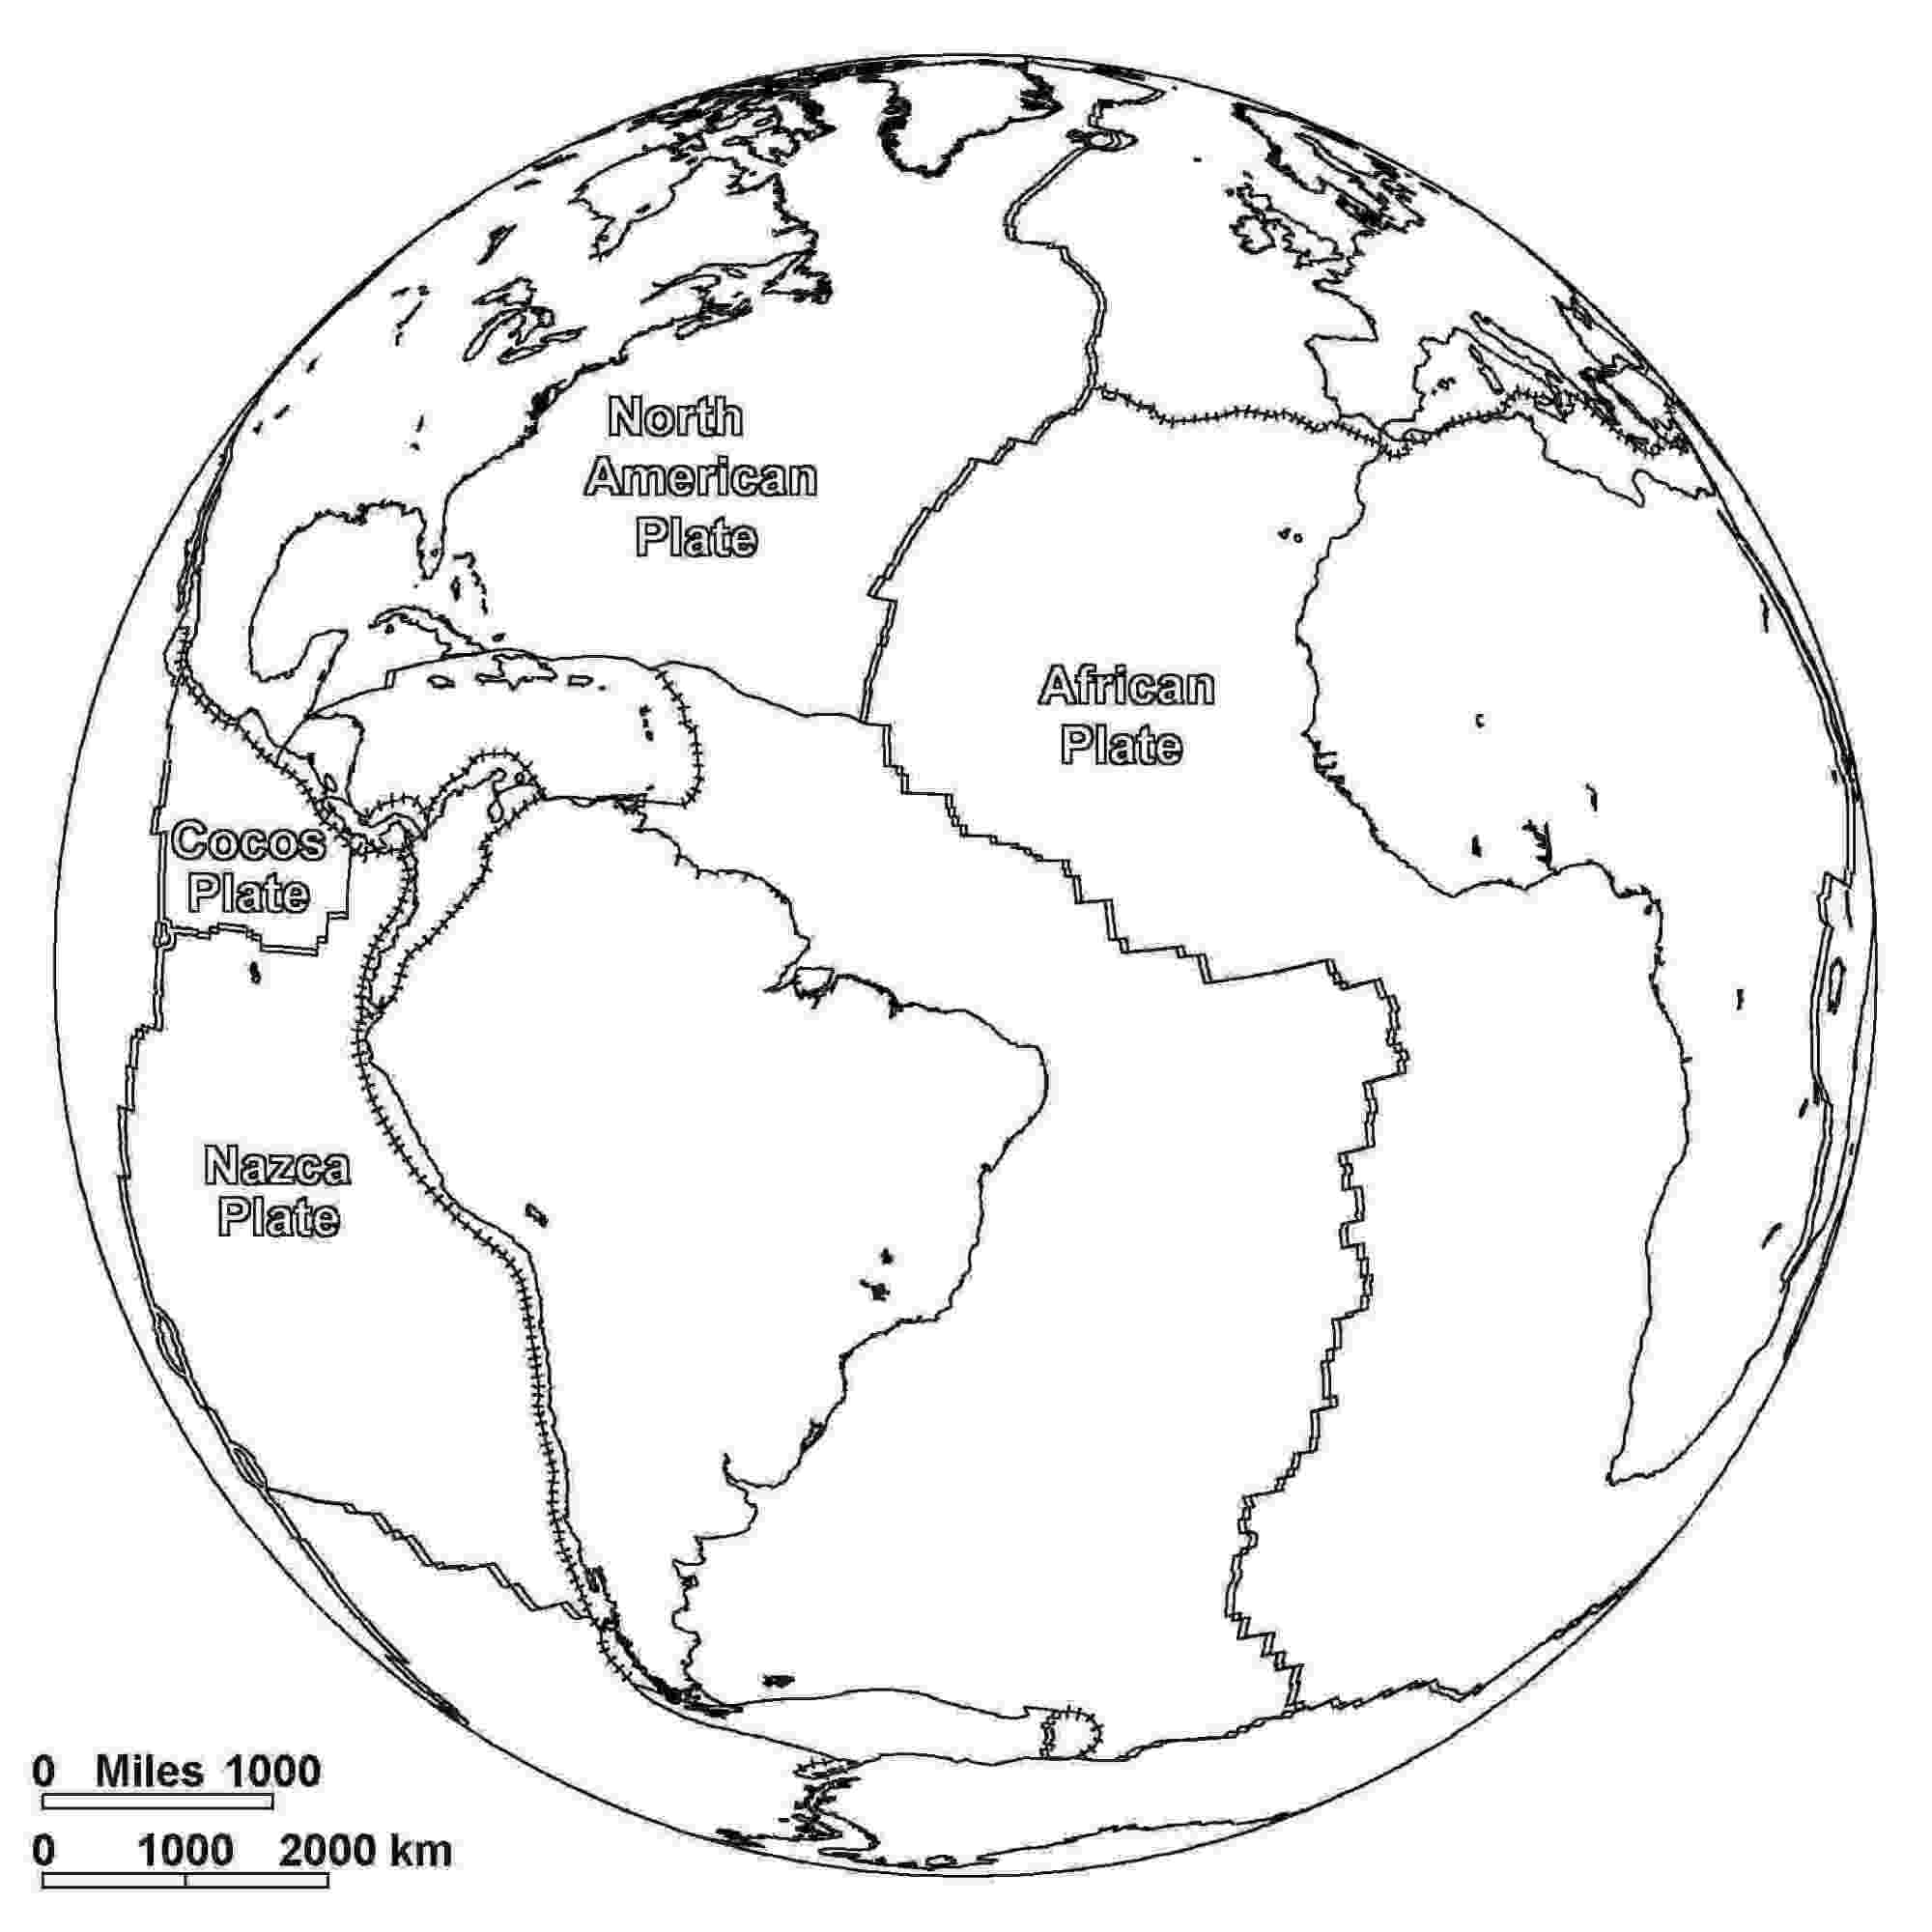 Major Tectonic Plates and Their Approximate Direction of Movement